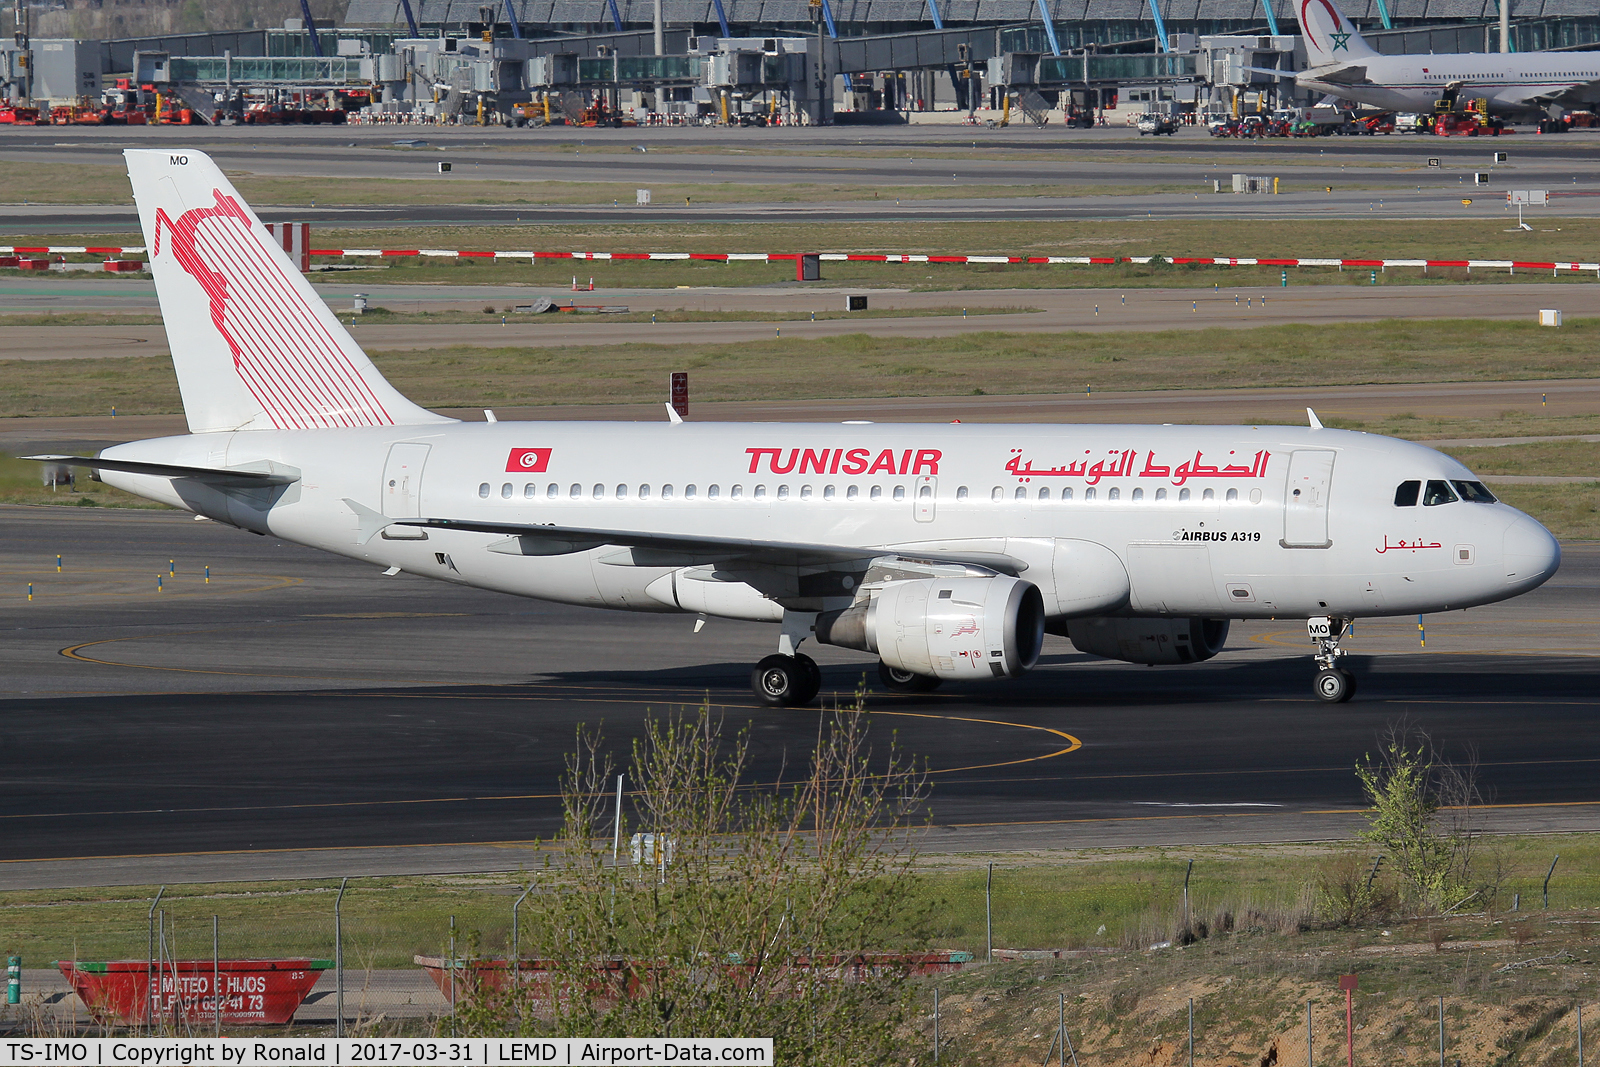 TS-IMO, 2001 Airbus A319-114 C/N 1479, at mad